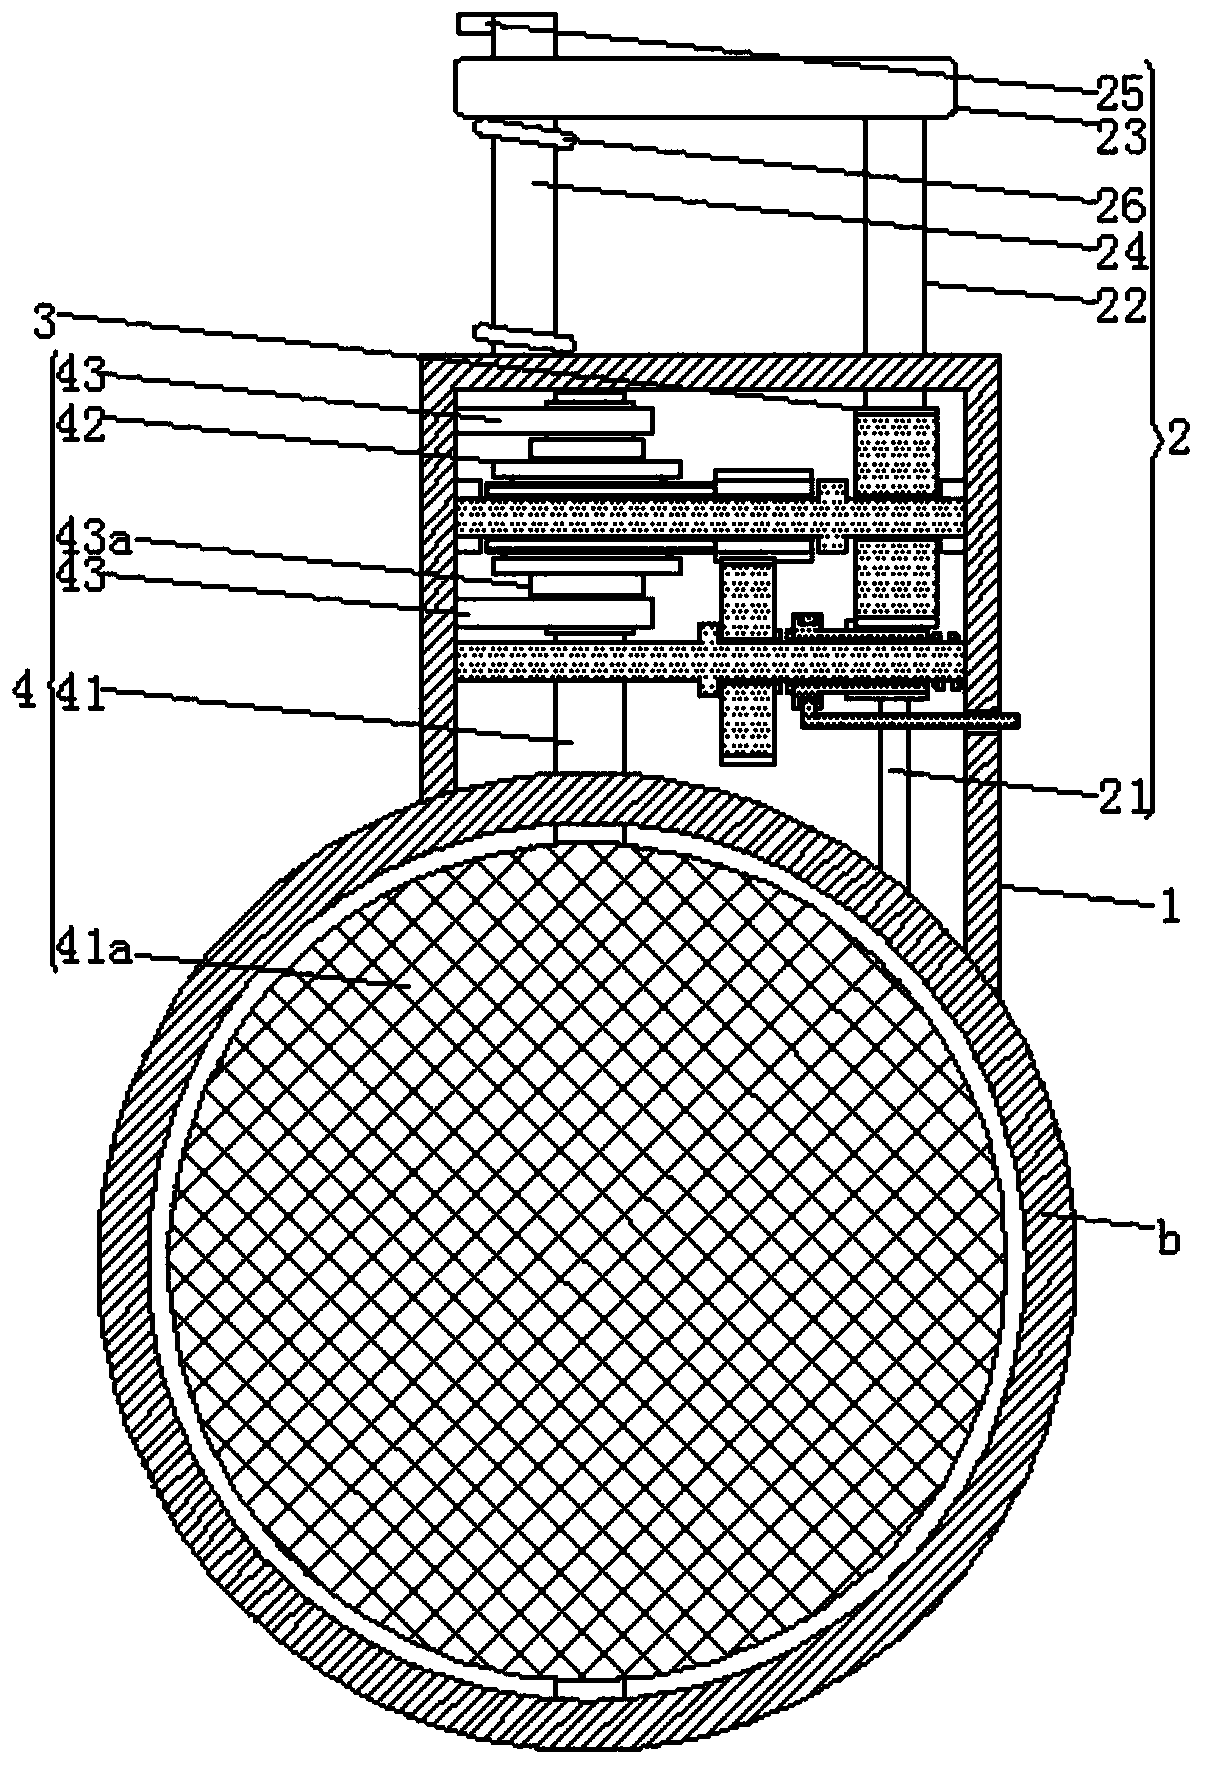 A grille device applied to prefabricated pumping station